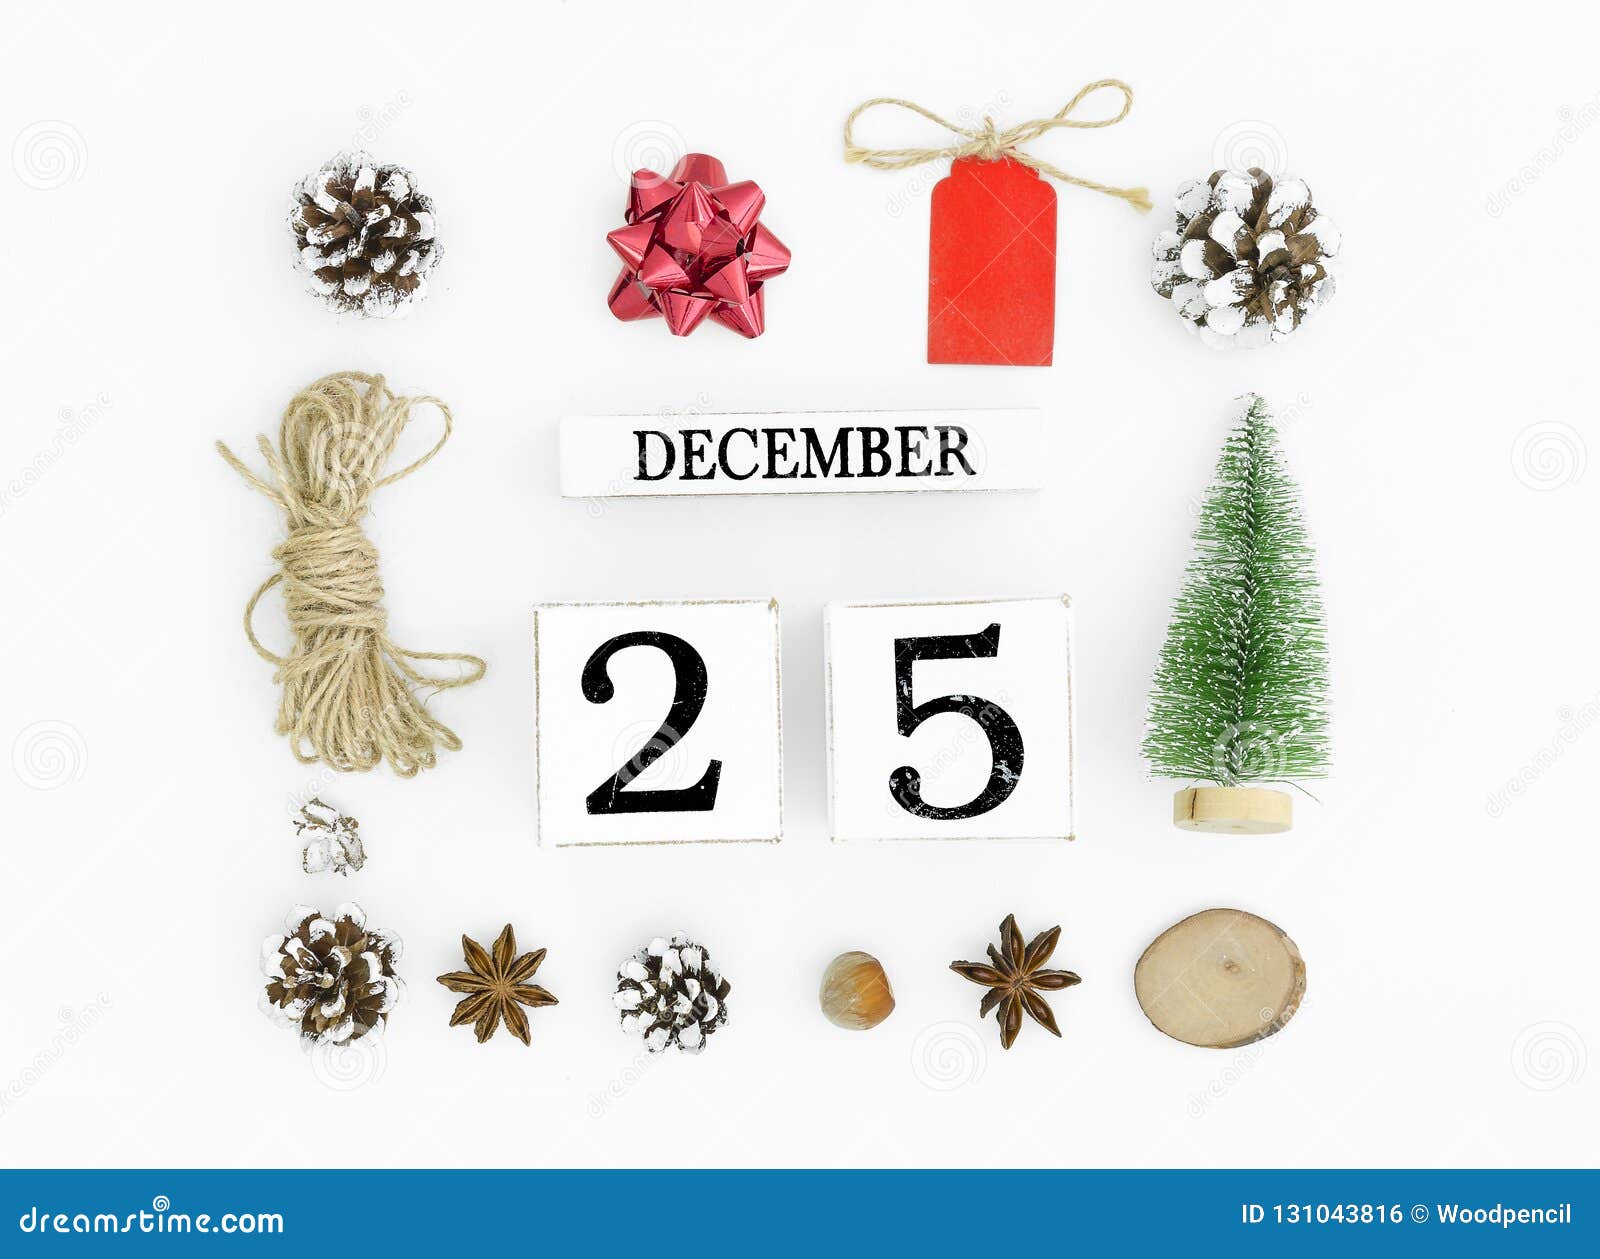 25 Natale.25 December Perpetual Calendar Christmas Flatlay Compositiond Stock Photo Image Of Heart 25dec 131043816